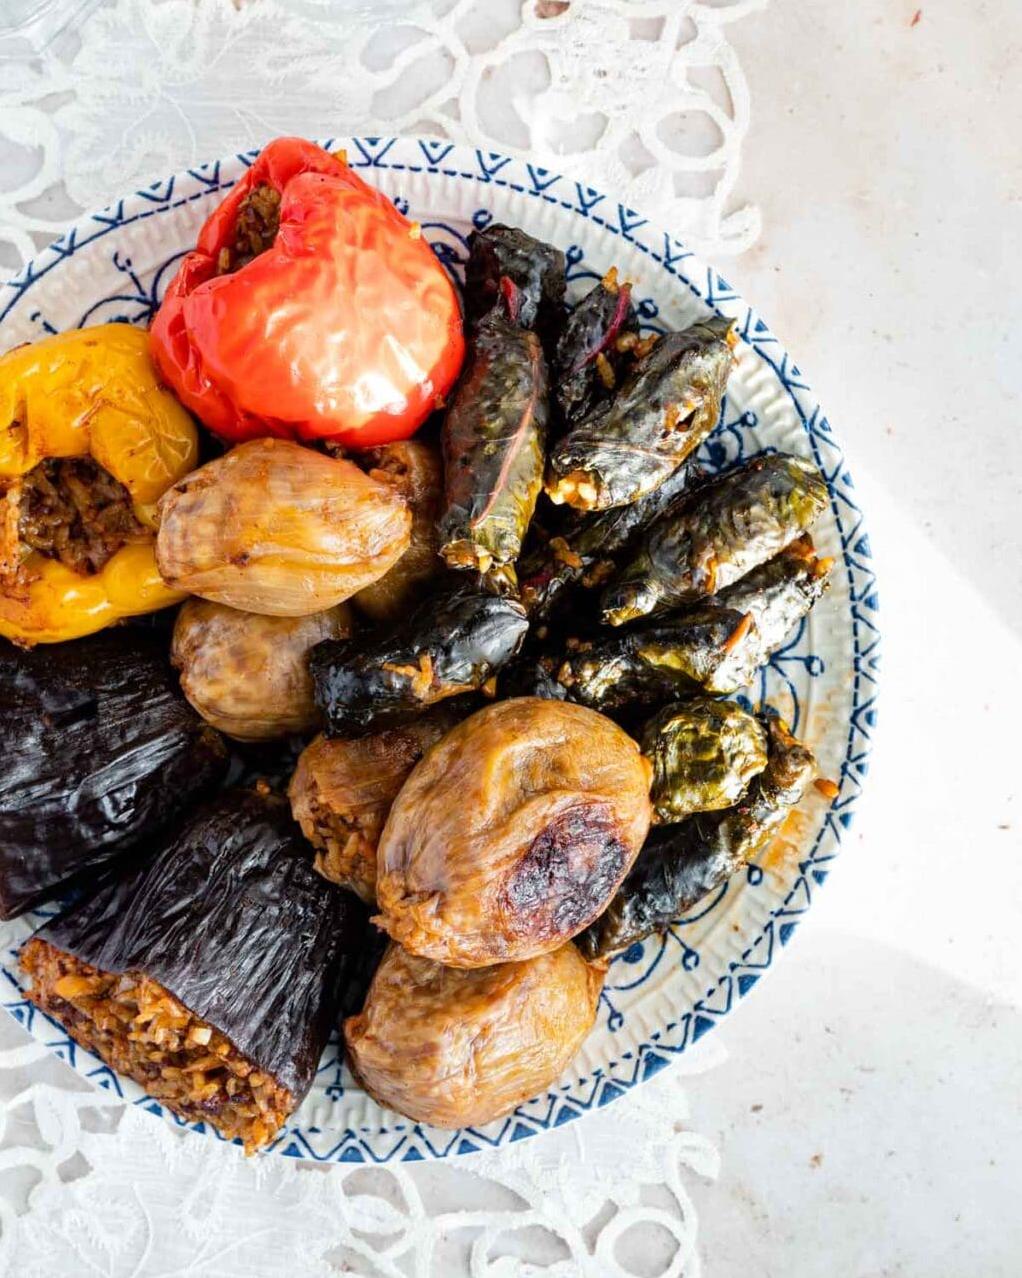  A delicious platter of dolmas stuffed to perfection!